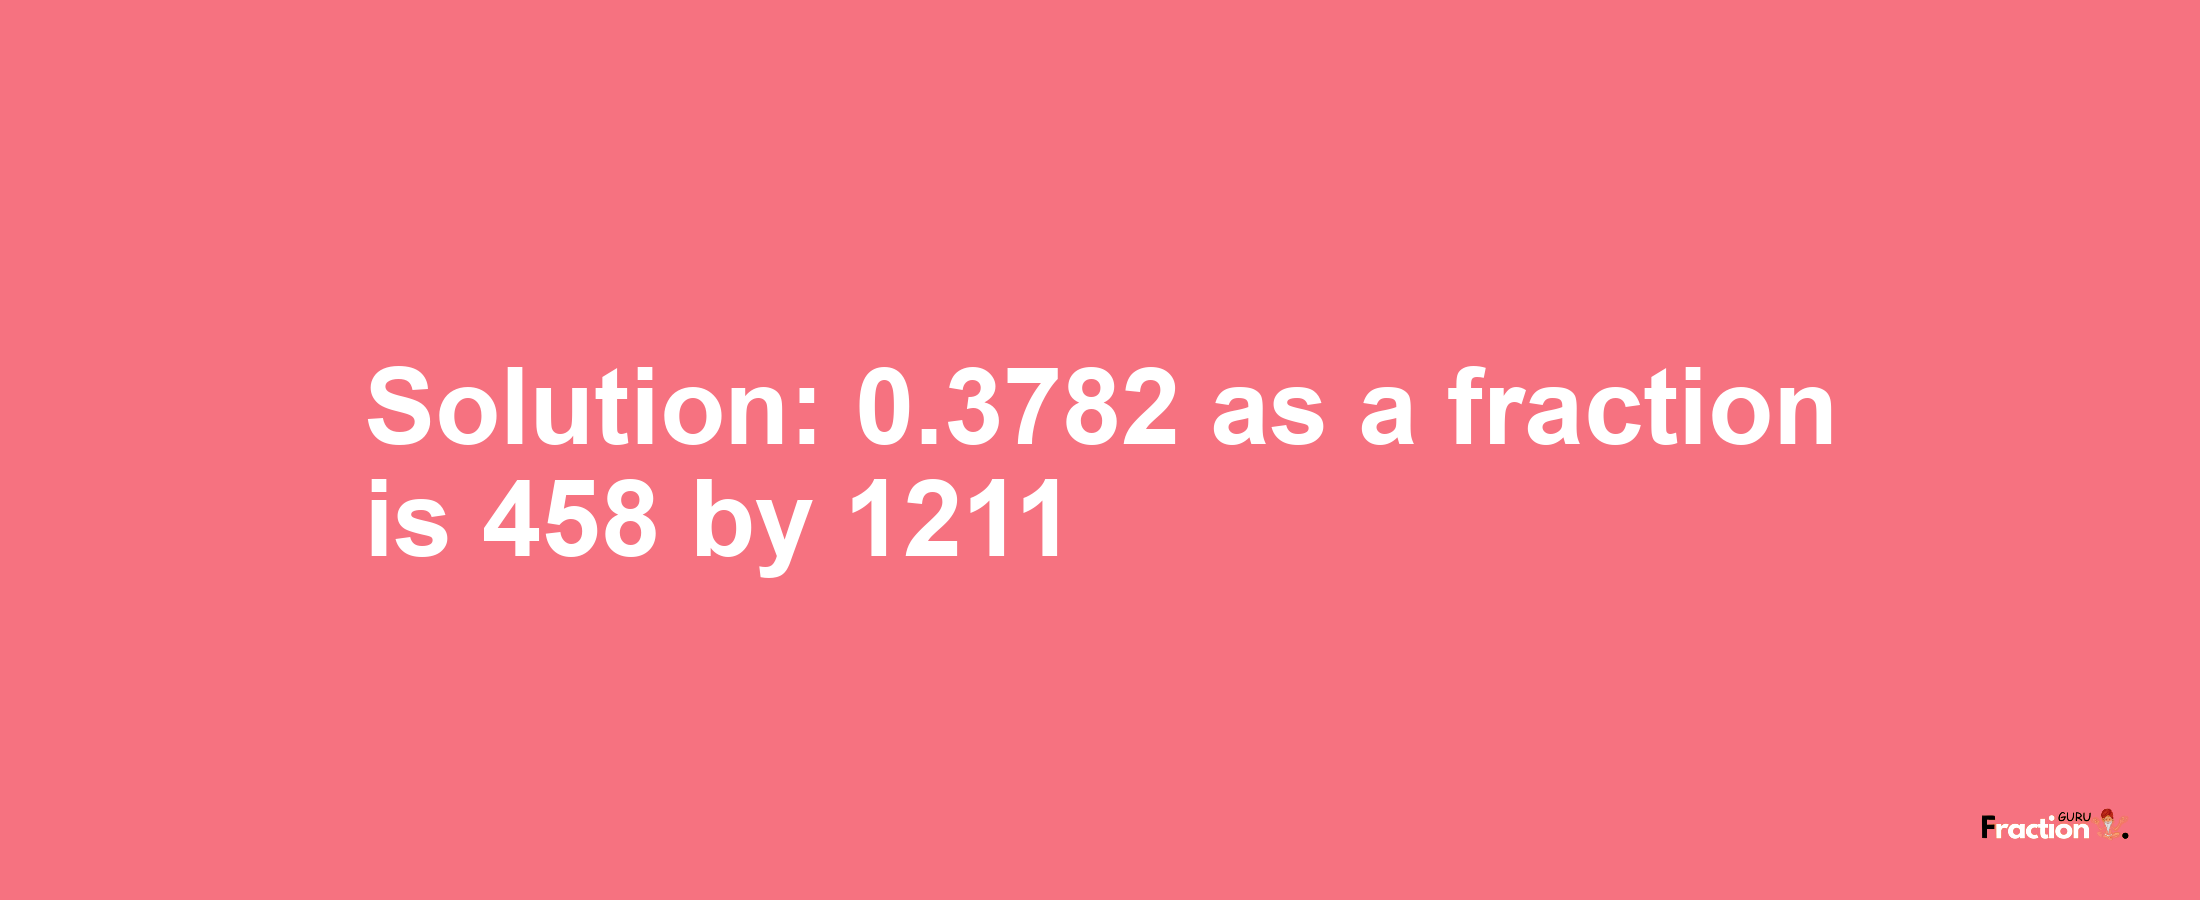 Solution:0.3782 as a fraction is 458/1211